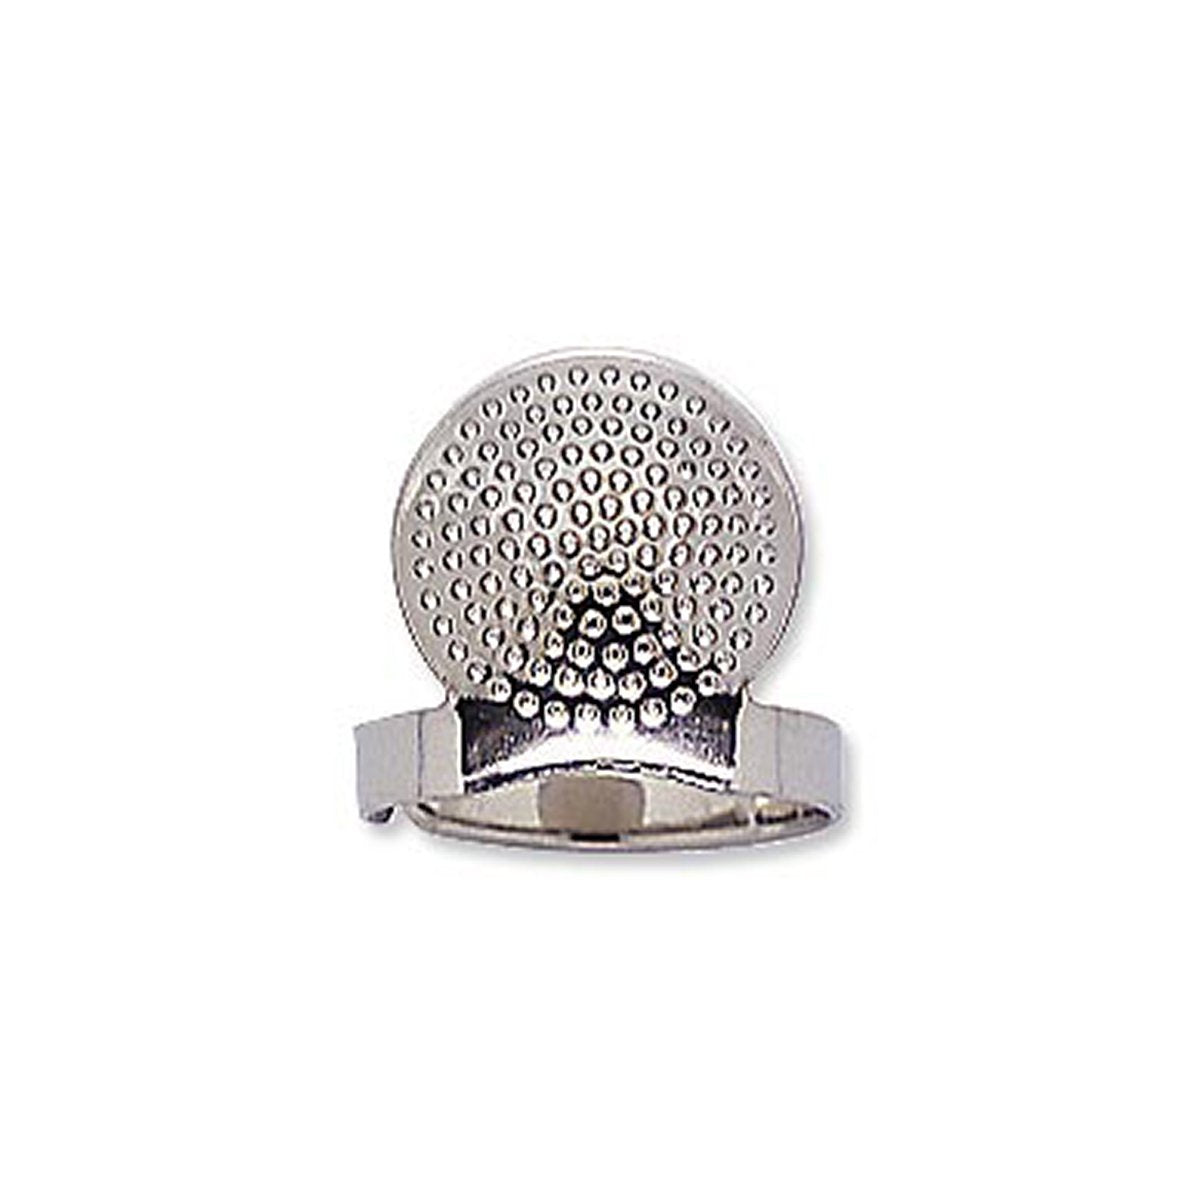 CLV - Adjustable Ring Thimble With Plate - 0